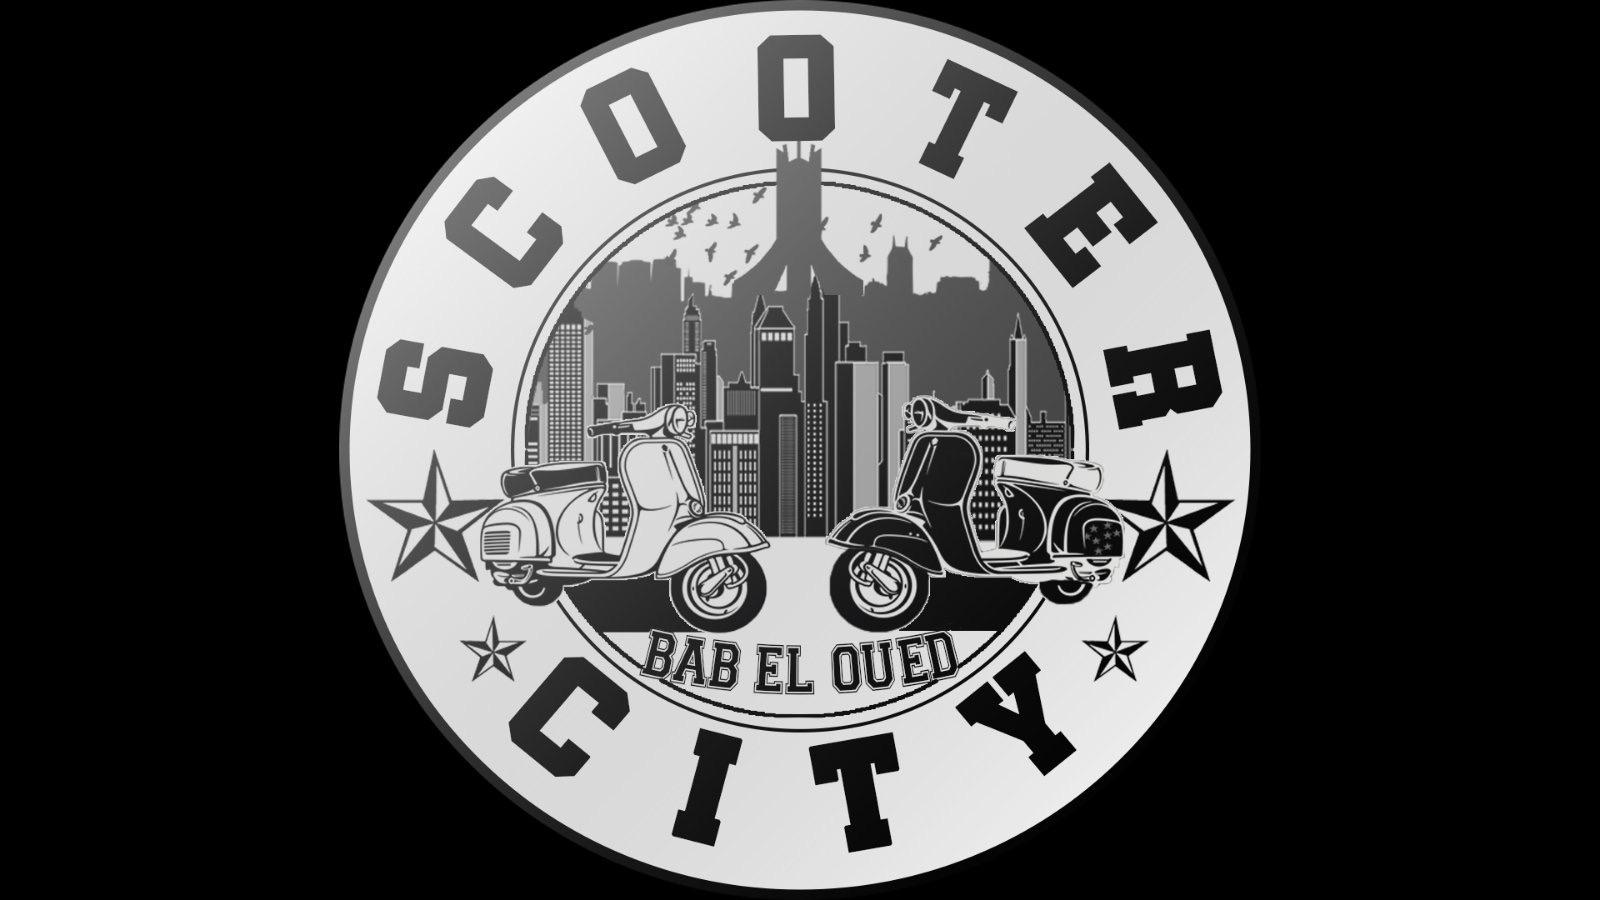 Scooter City